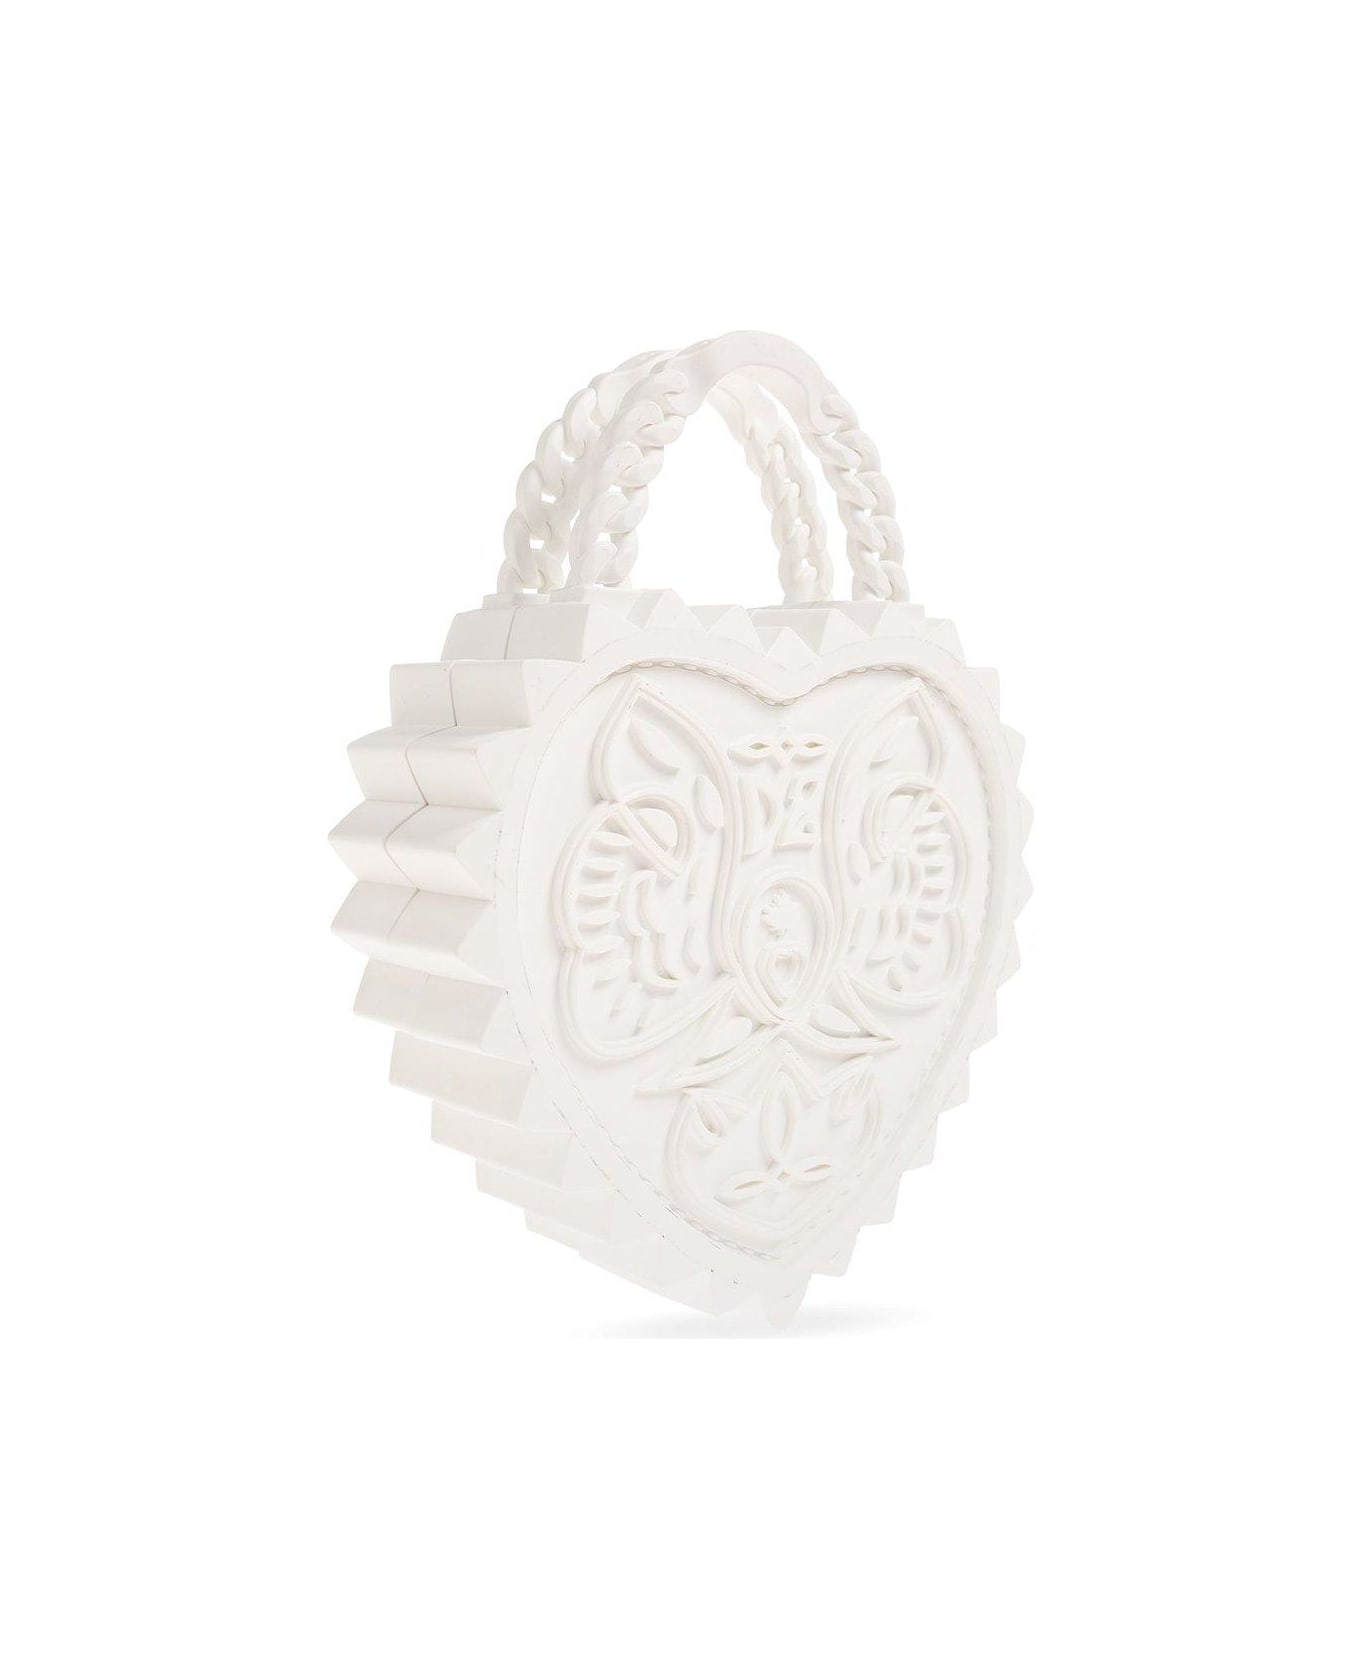 Dsquared2 Open Your Heart Top Handle Bag - Bianco